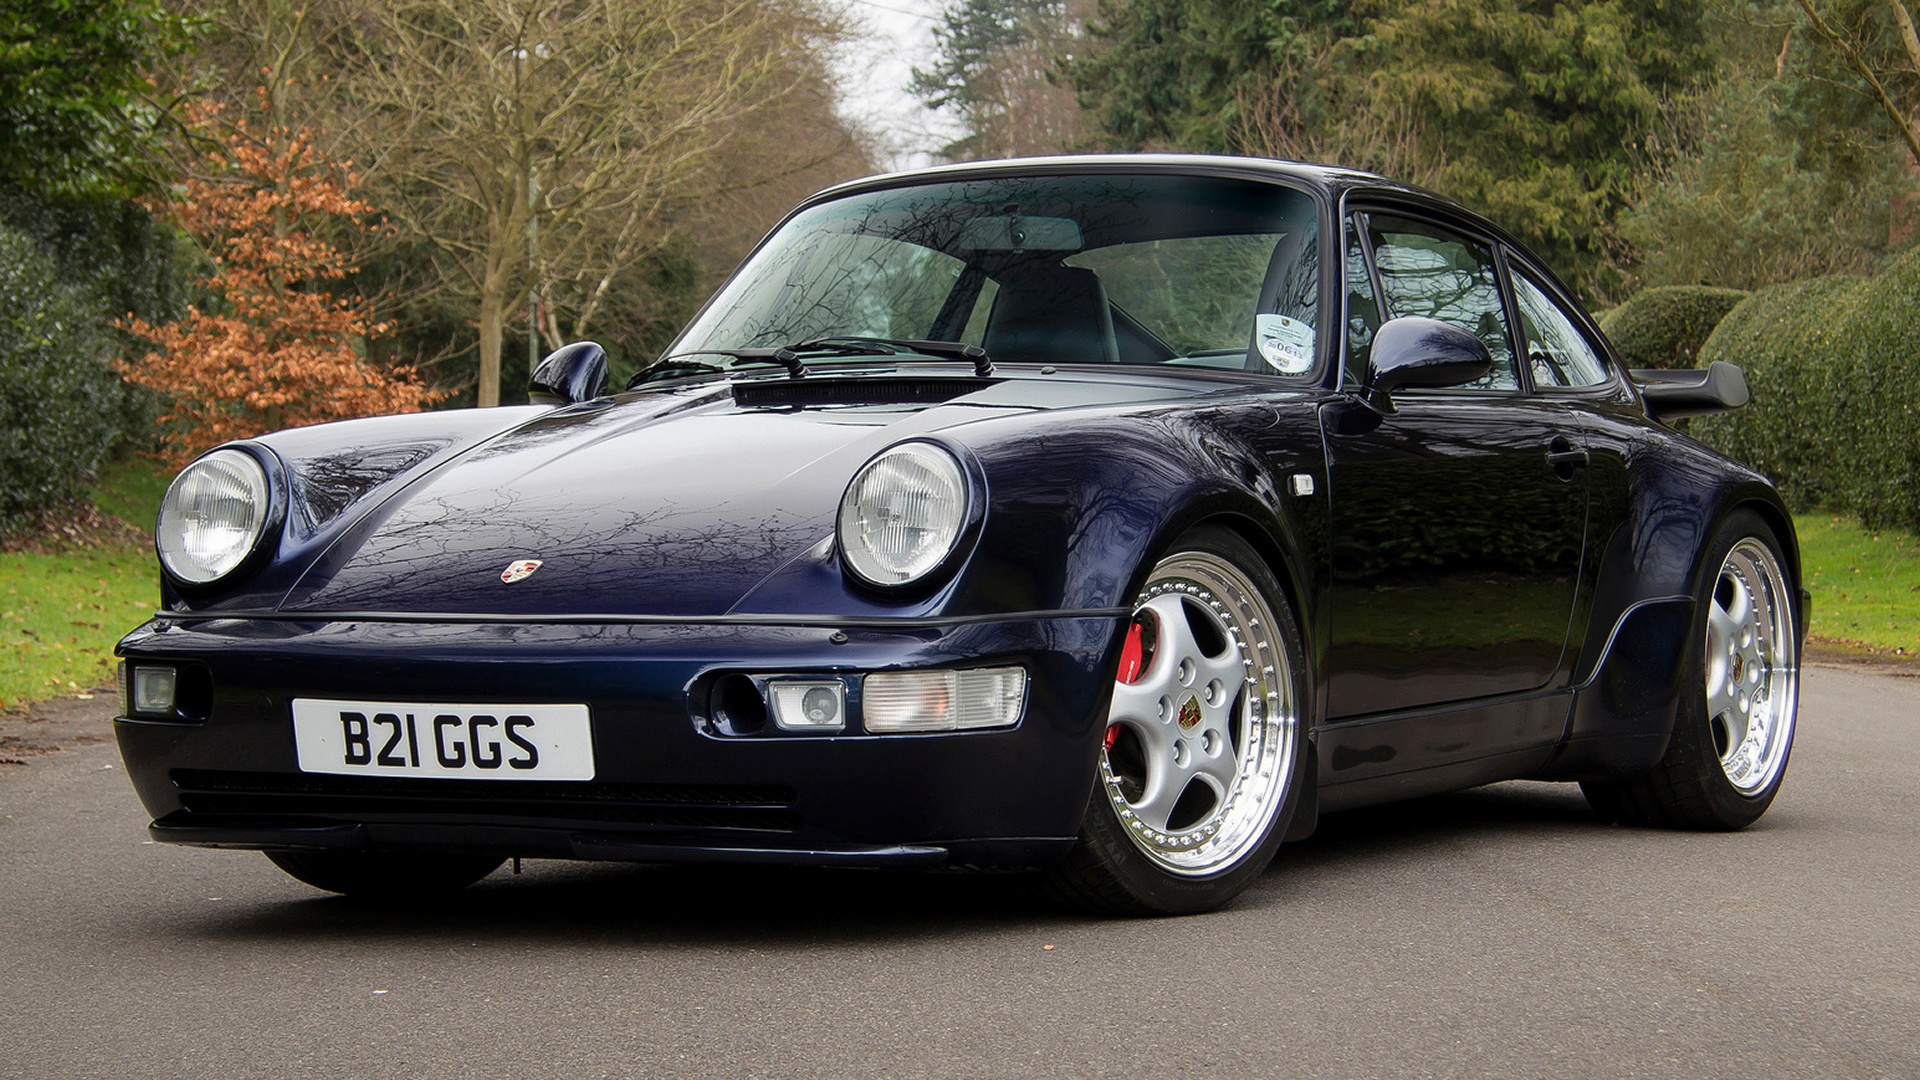 1992 Porsche 911 Turbo (UK) - Wallpapers and HD Images | Car Pixel